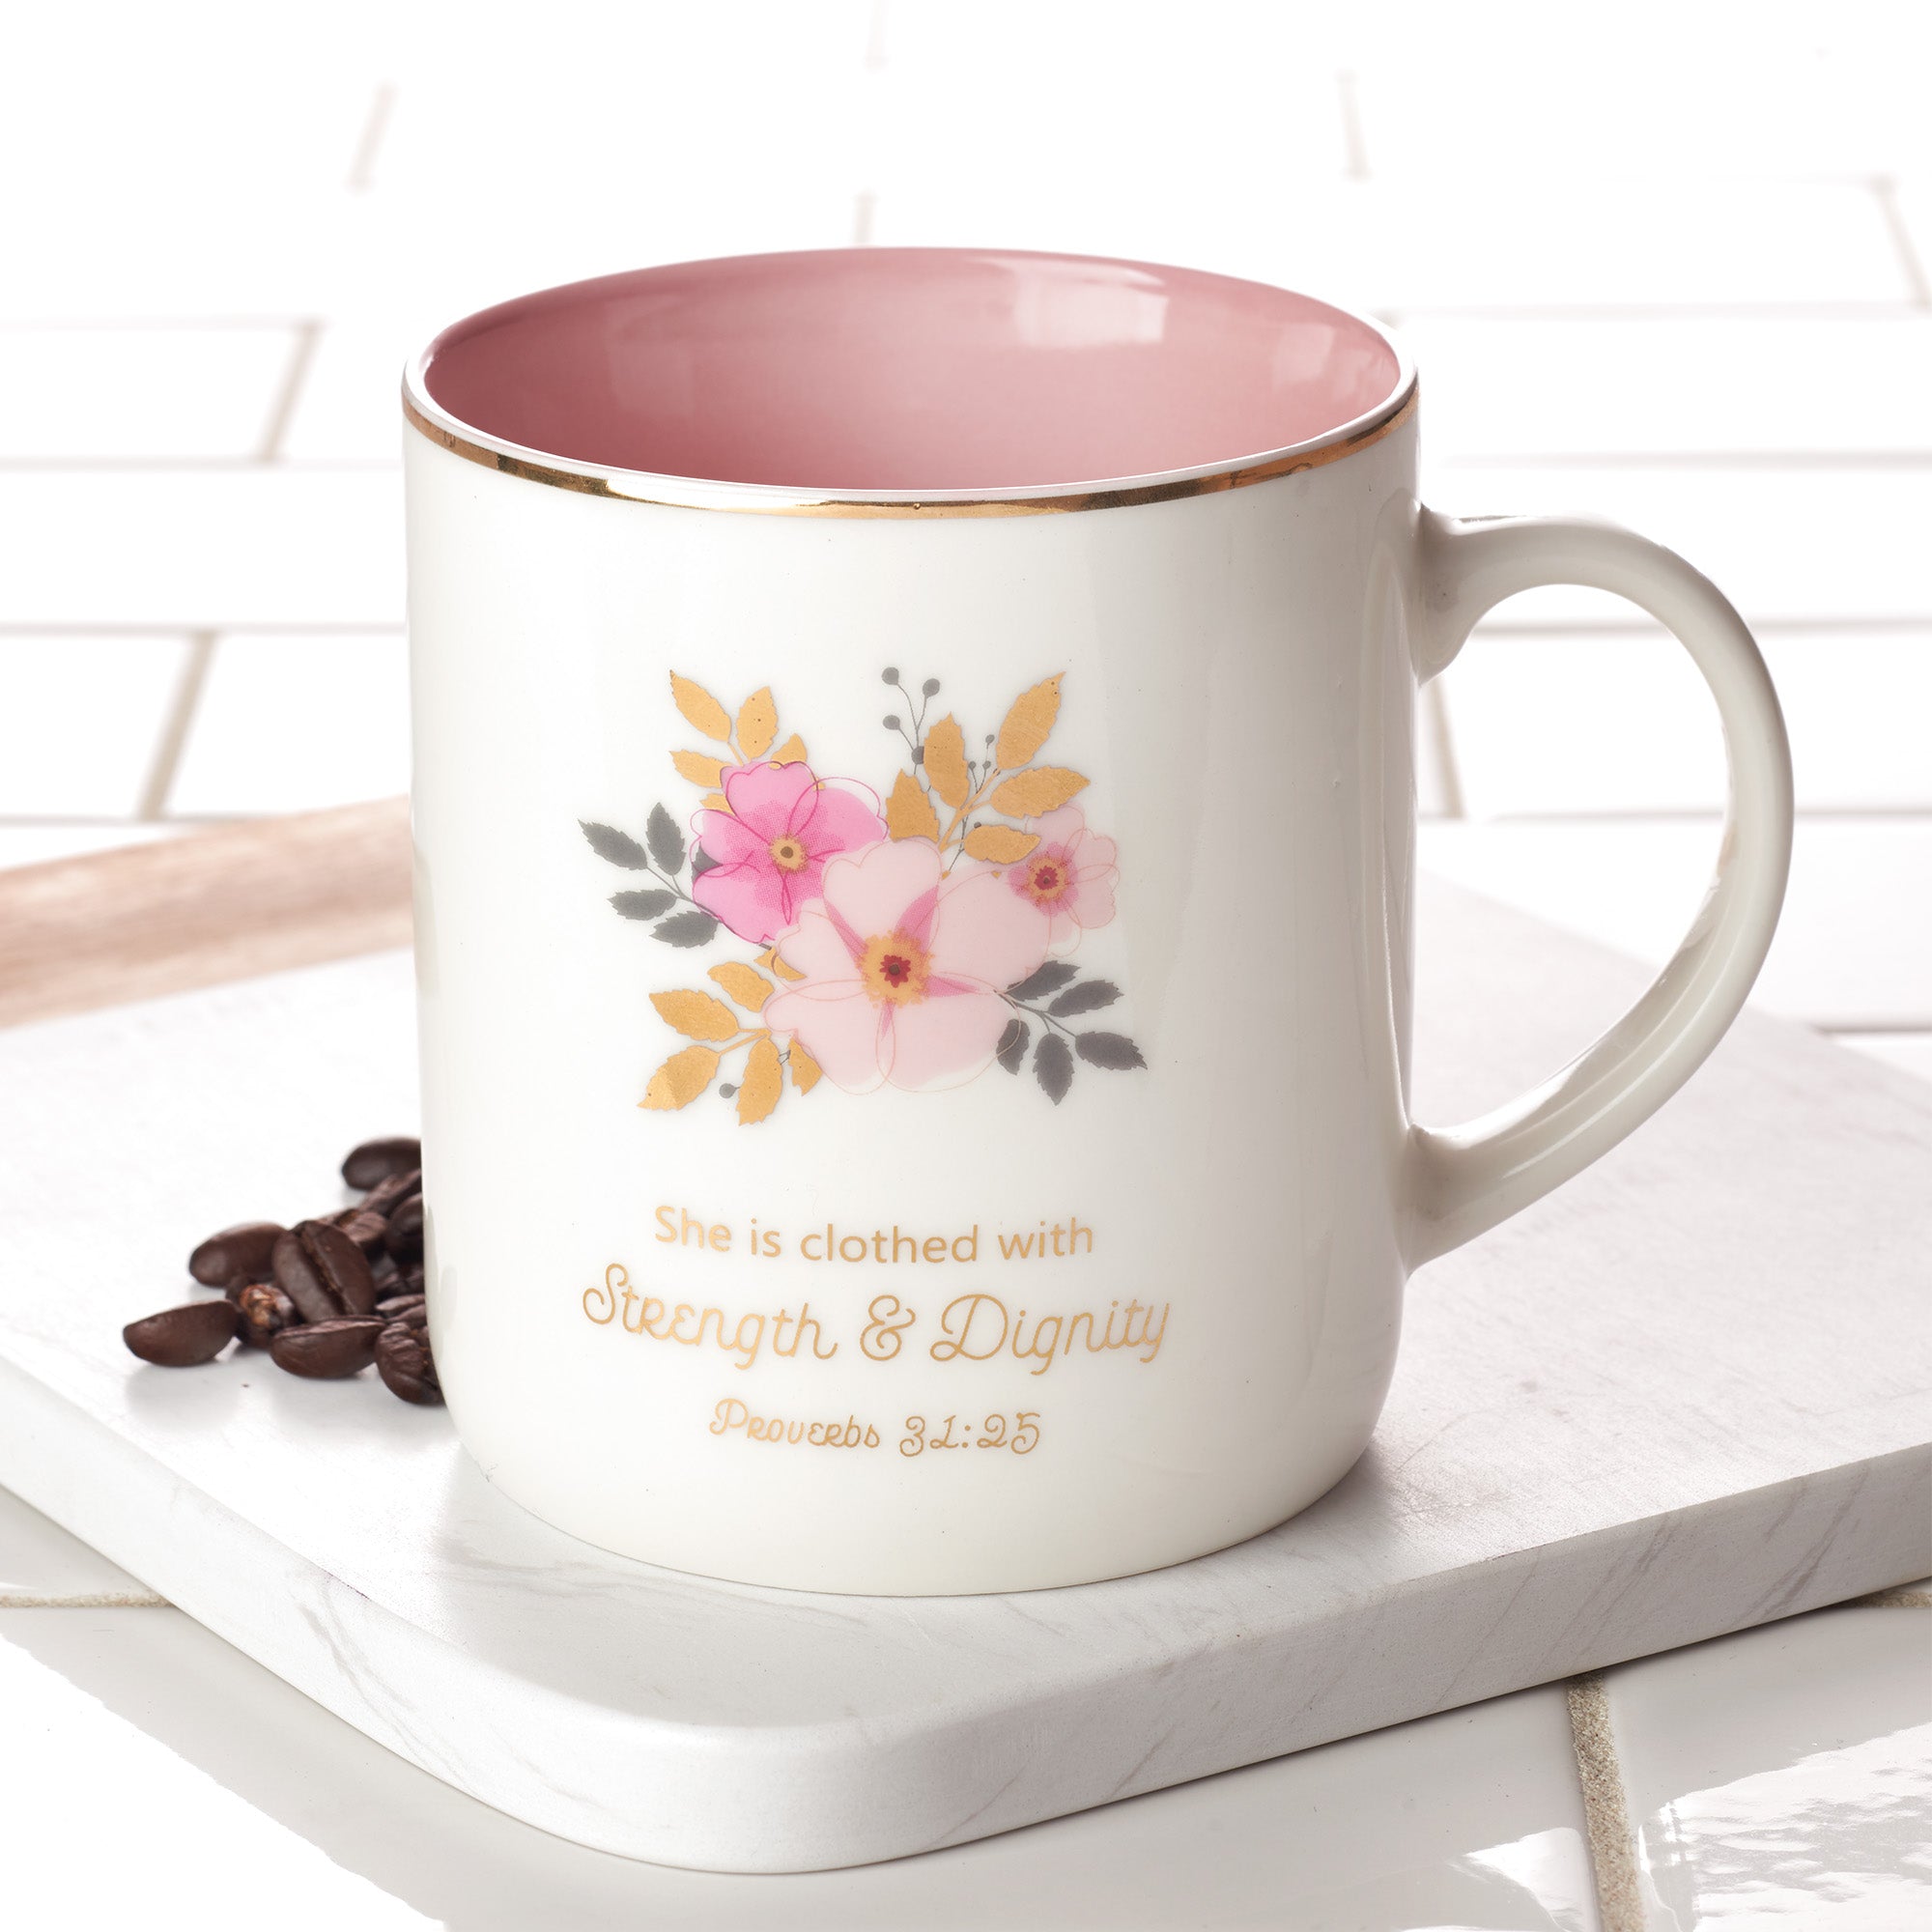 Image of Strength & Dignity Ceramic Coffee Mug – Proverbs 31:25 other